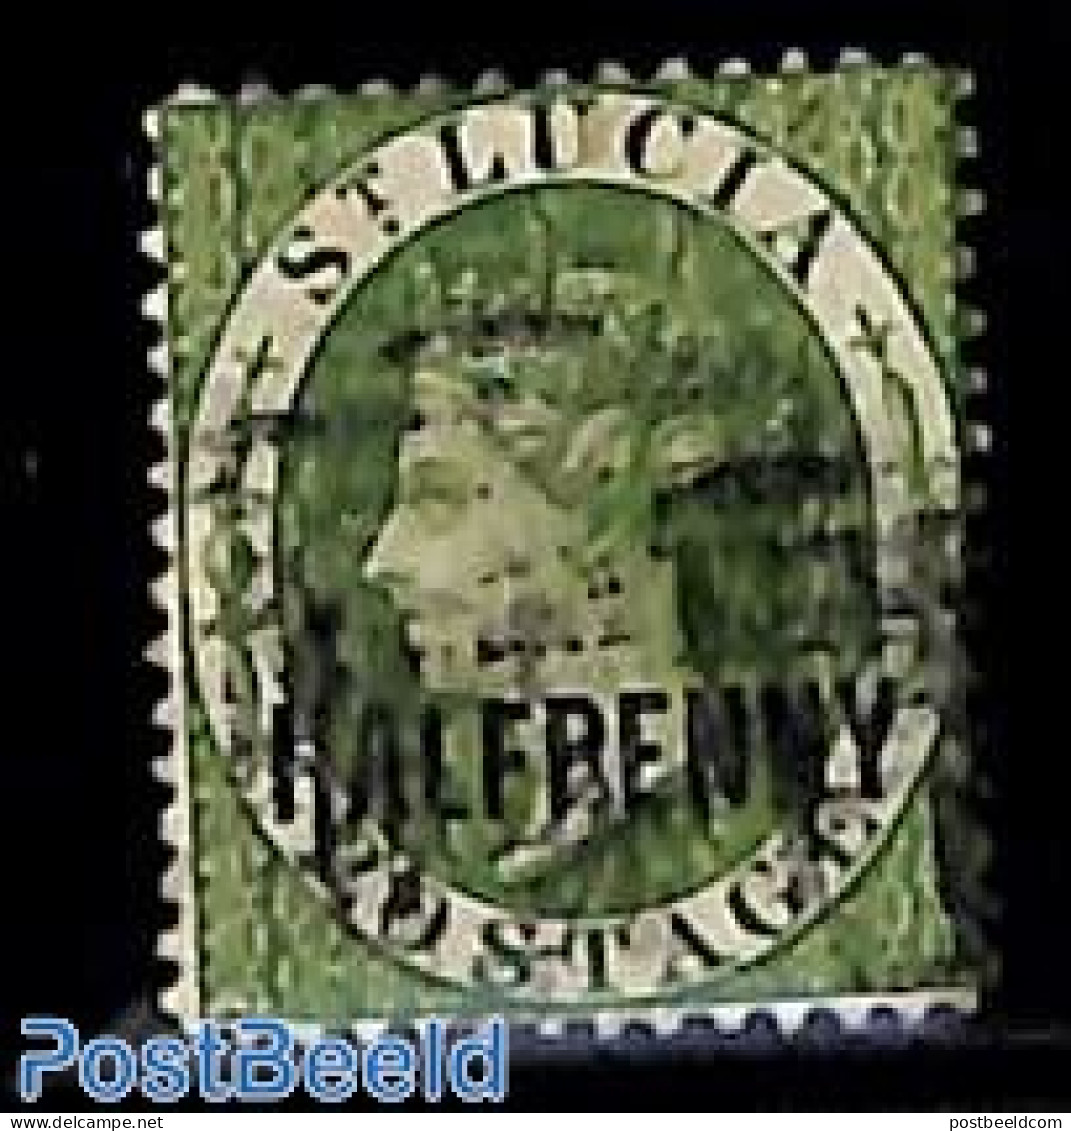 Saint Lucia 1881 HALFPENNY, Used, Used Stamps - St.Lucia (1979-...)